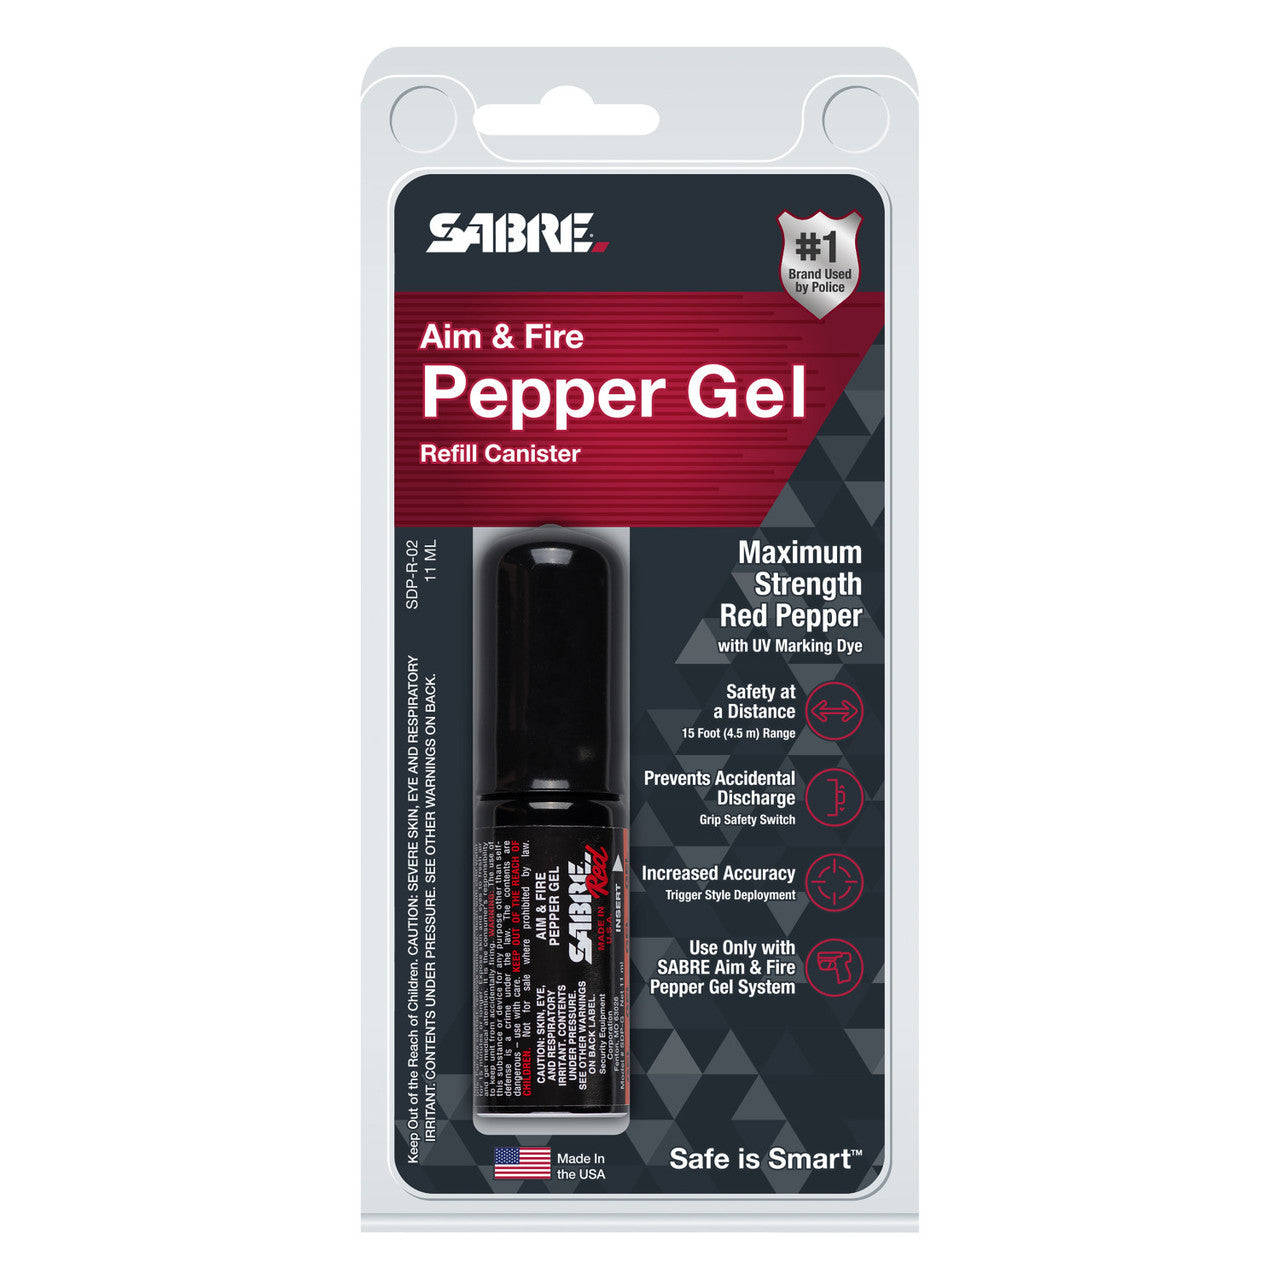 AIM AND FIRE PEPPER GEL REFILL CANISTER